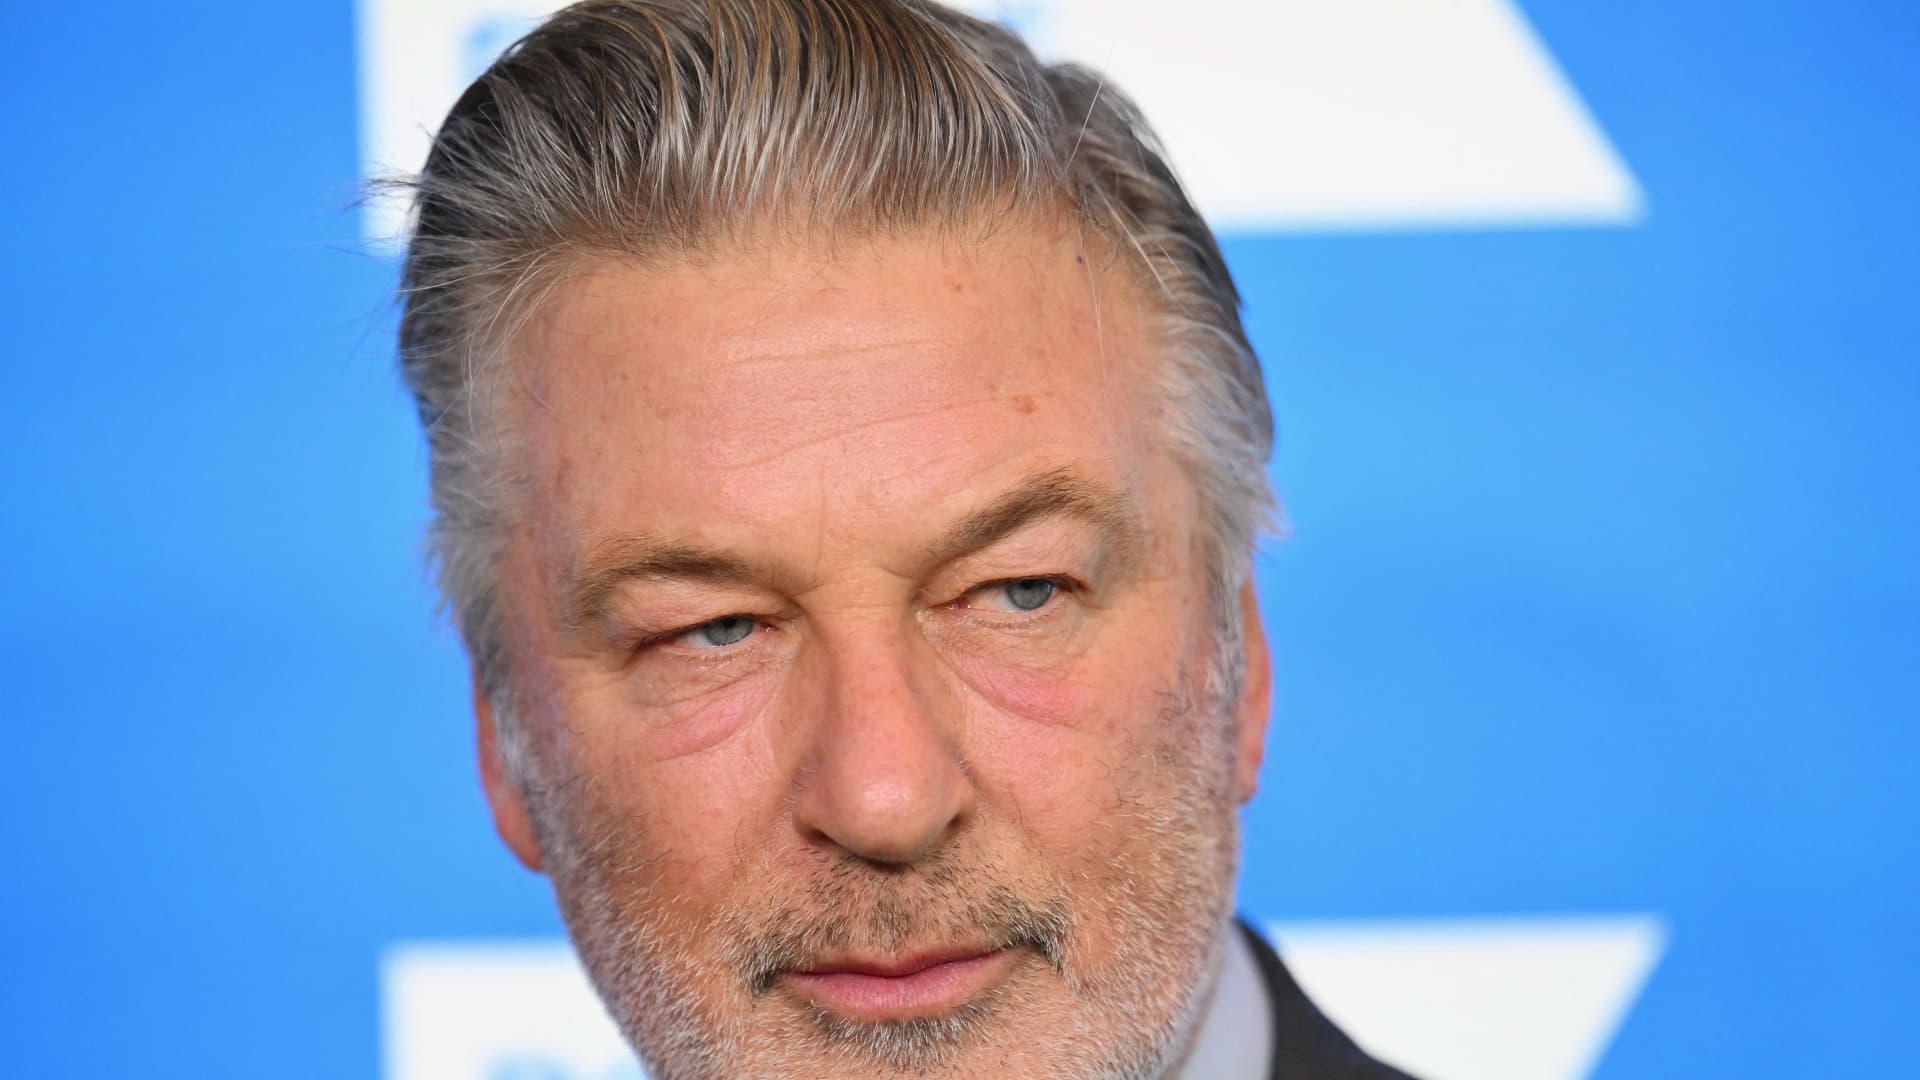 Alec Baldwin charged in ‘Rust’ shooting, prosecutors say he was ‘distracted’ during training